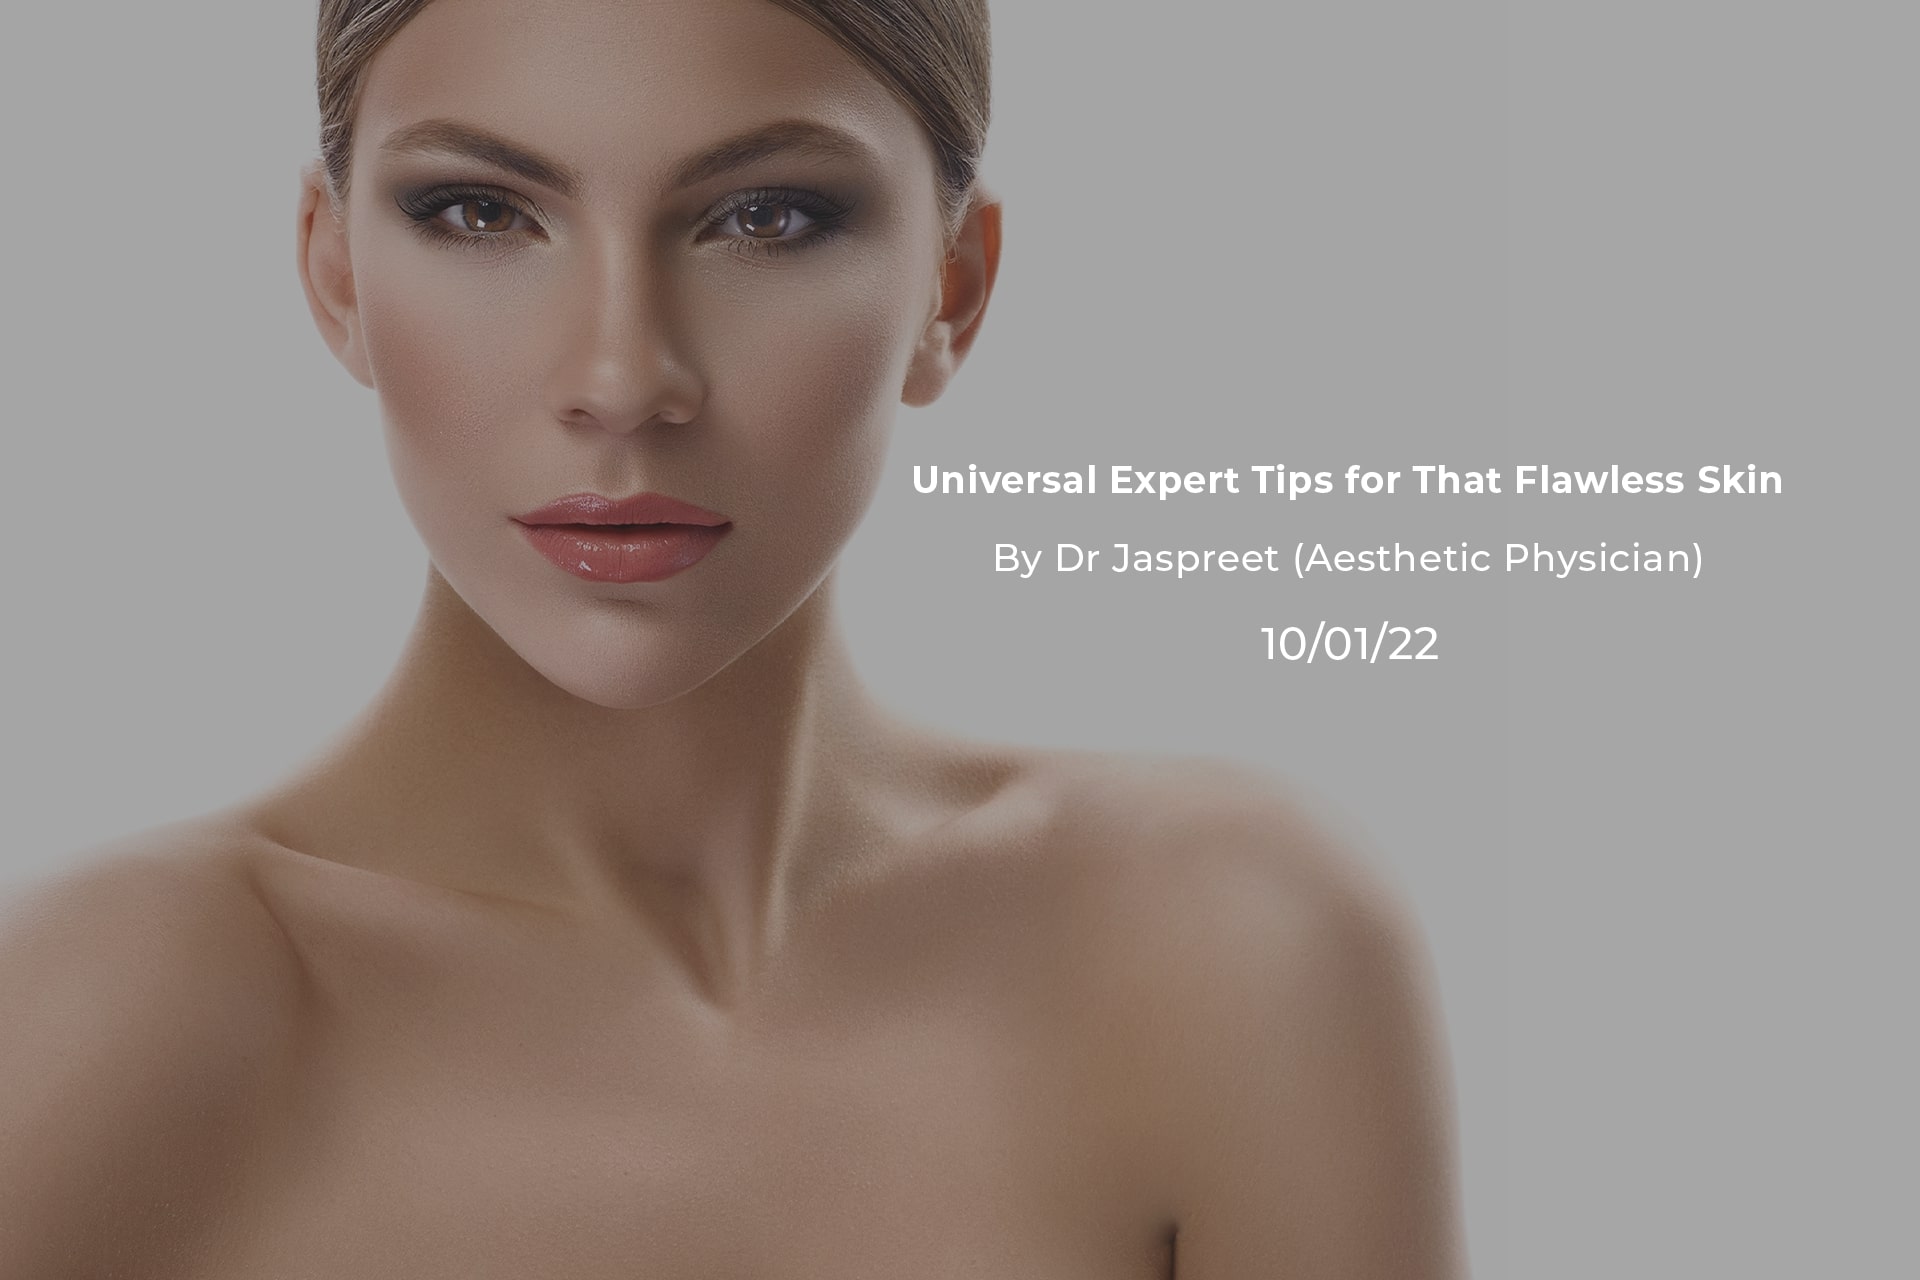 Universal Expert Tips for That Flawless Skin